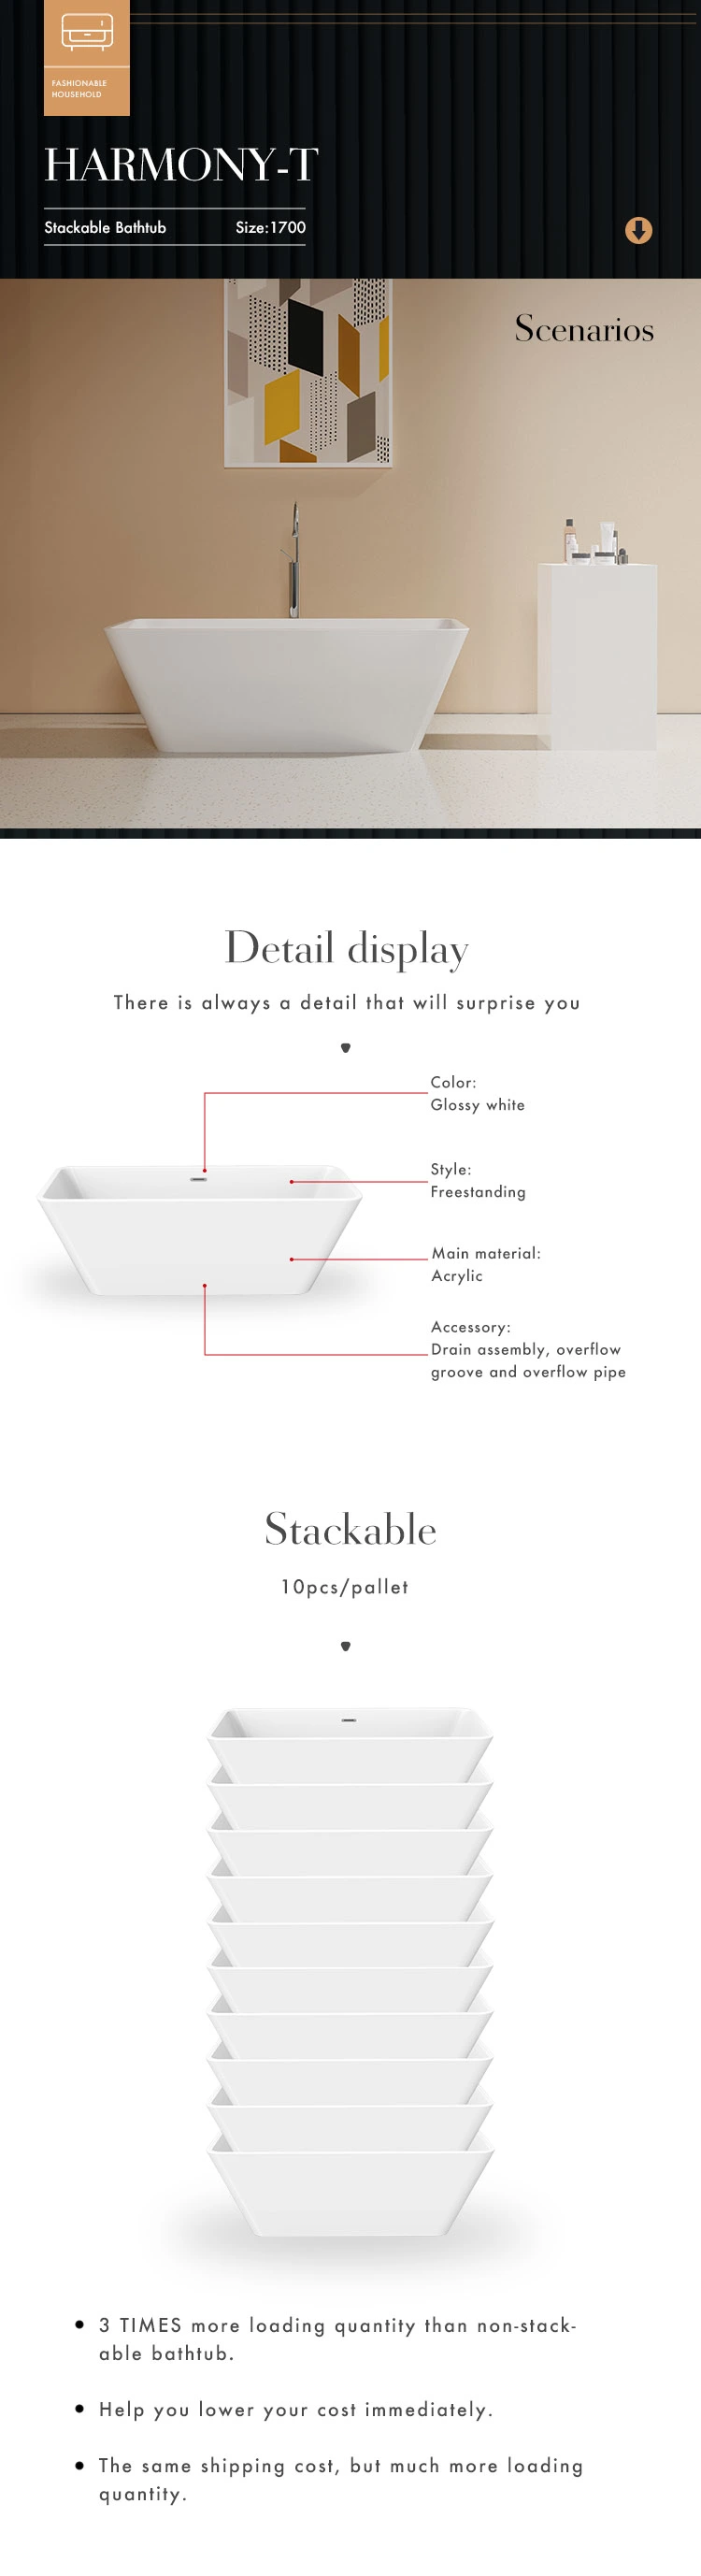 stackable bathtub specifications harmony-t